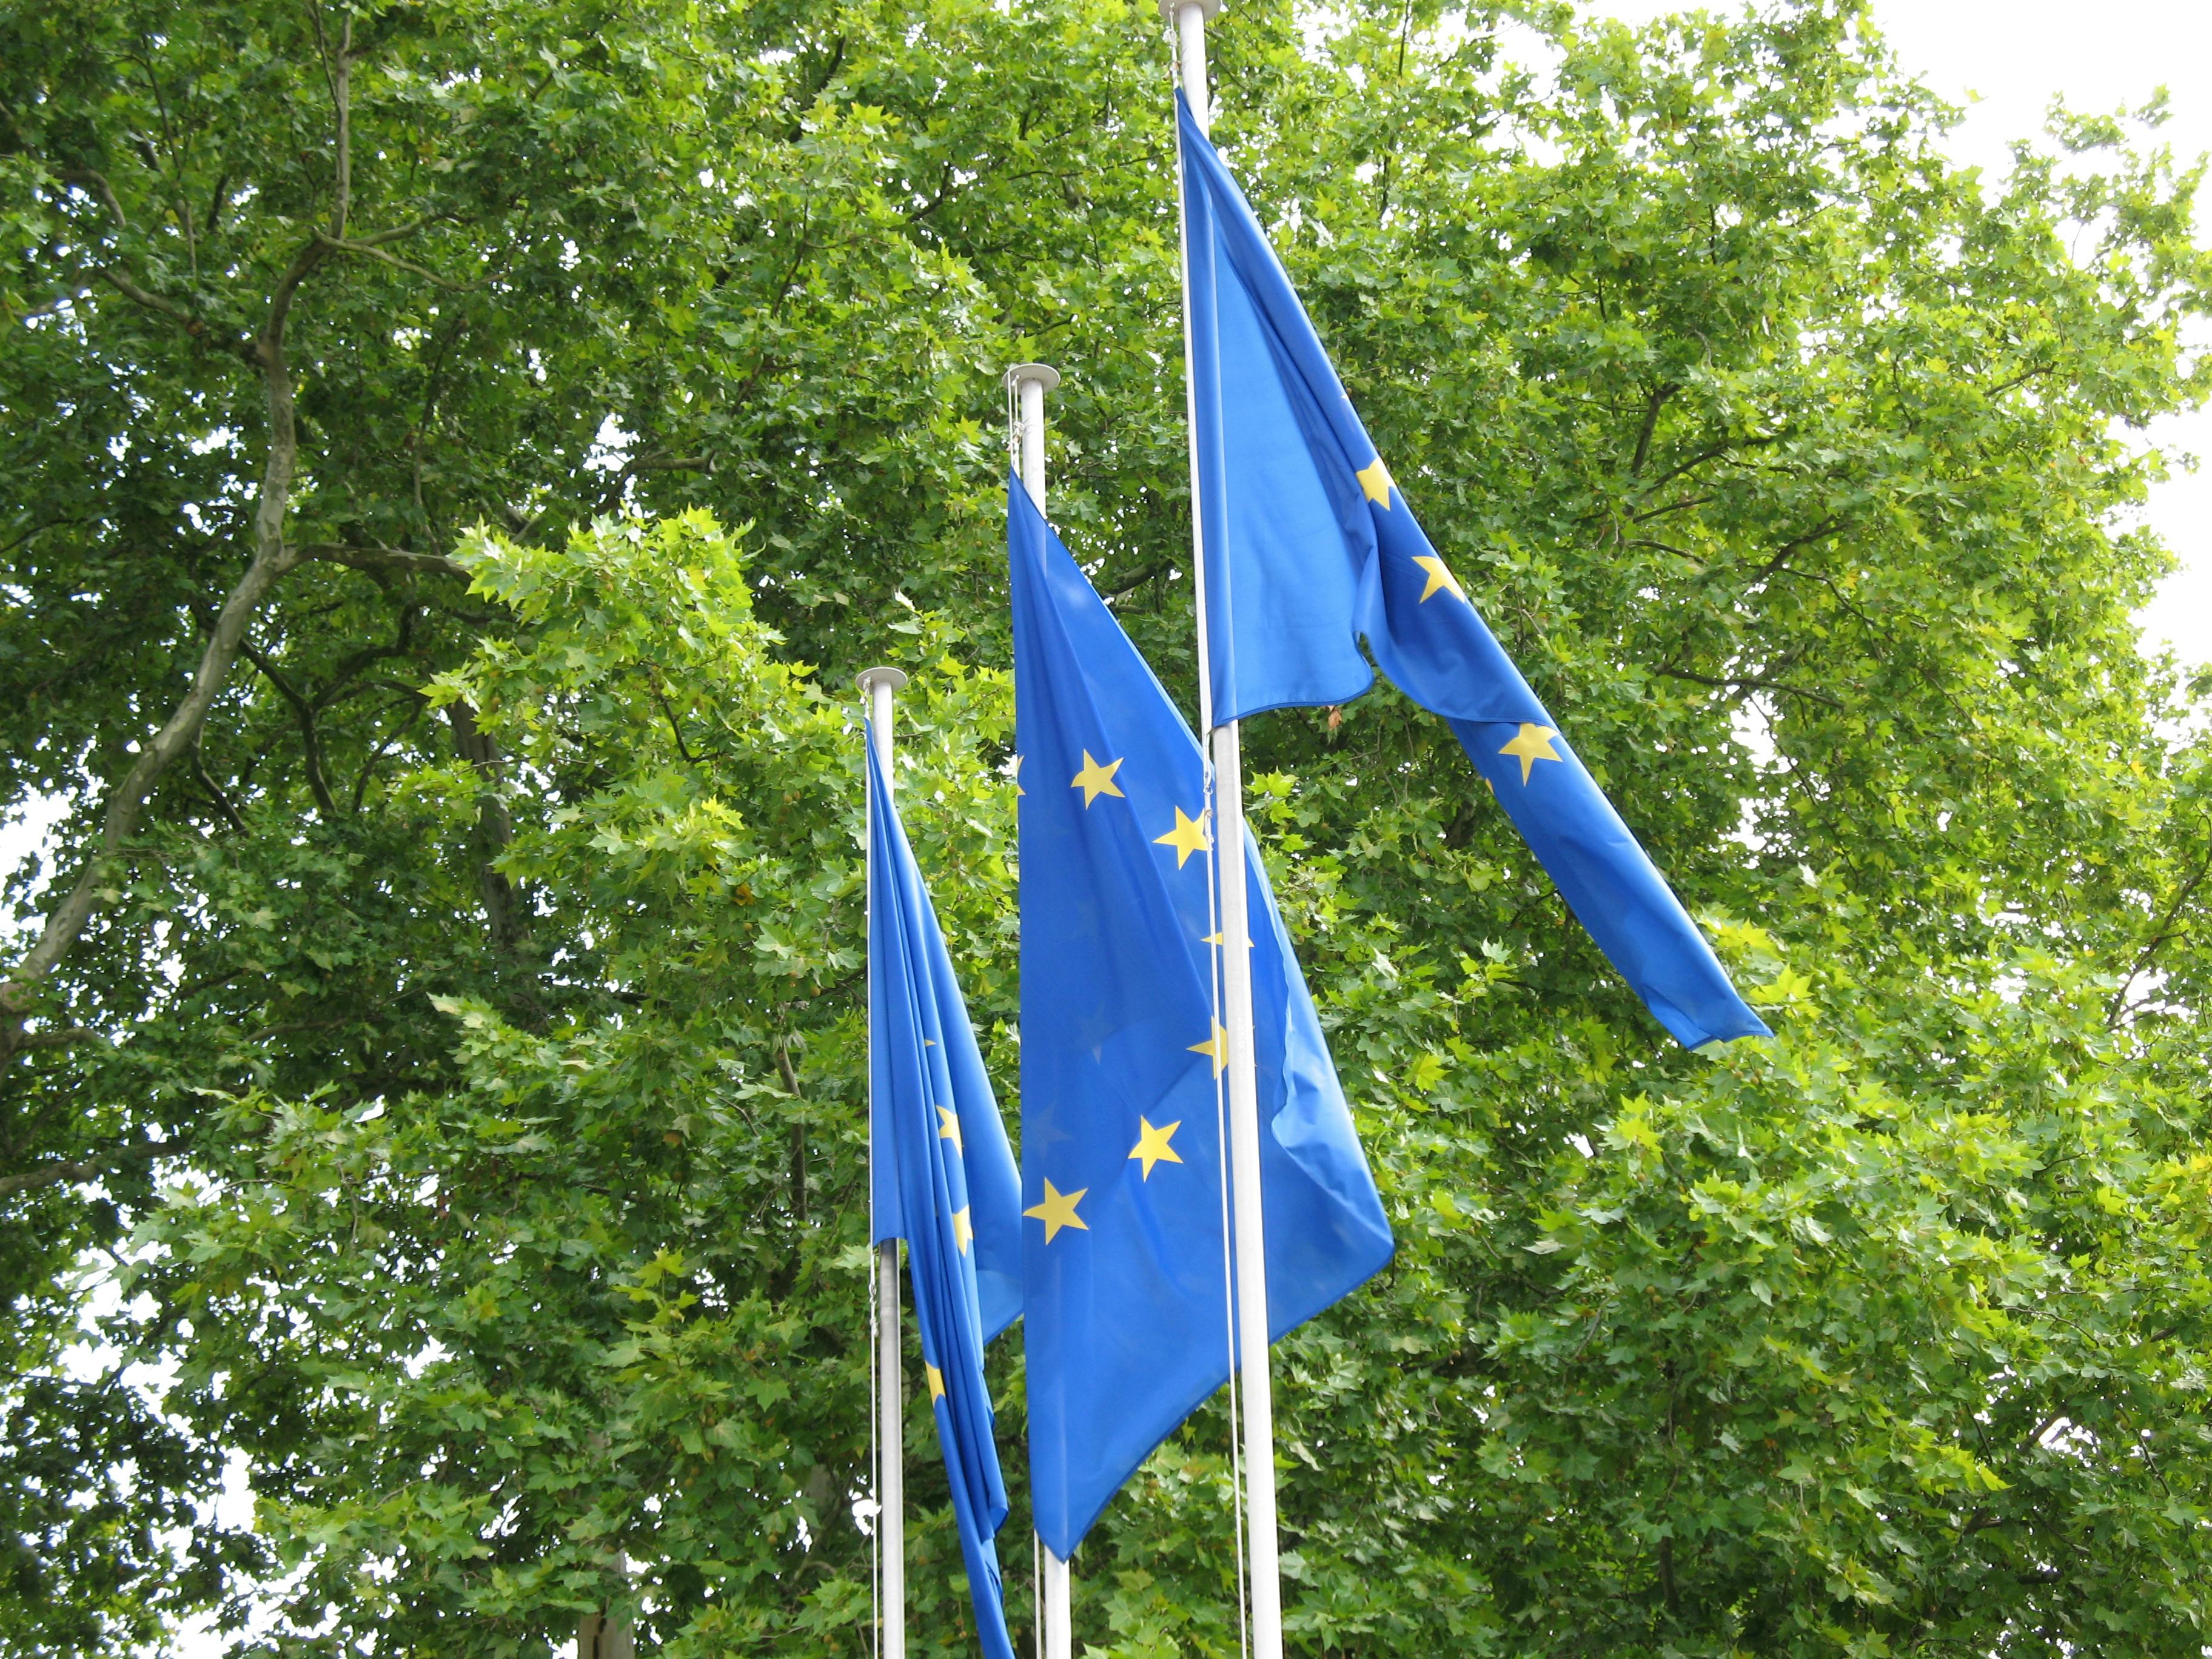 What will happen to the Green Deal after the European elections?